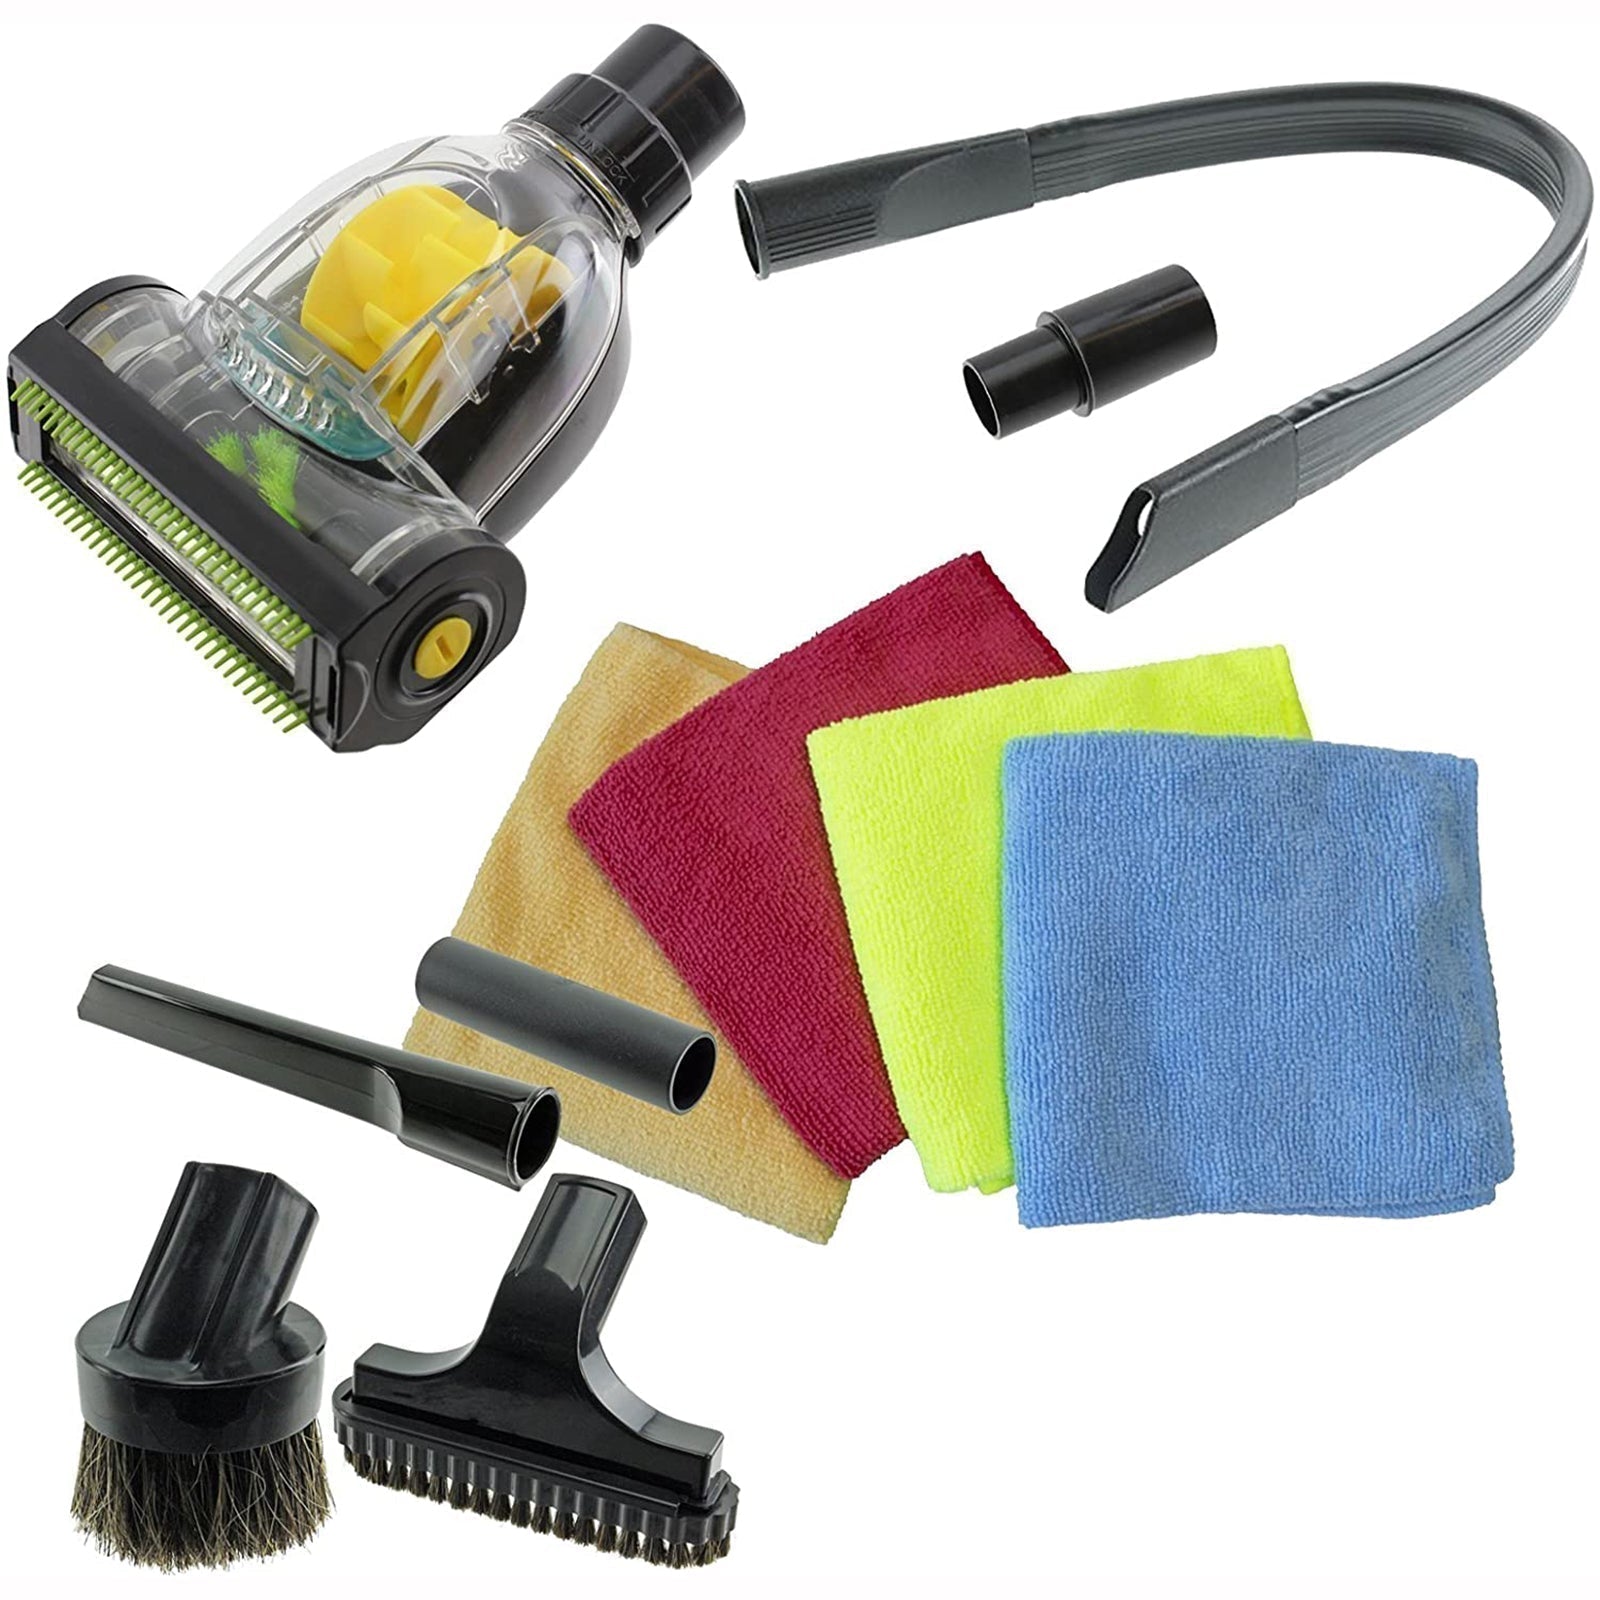 Car Valet Cleaning Tool Kit compatible with SAMSUNG Vacuum Cleaner (32mm/35mm)